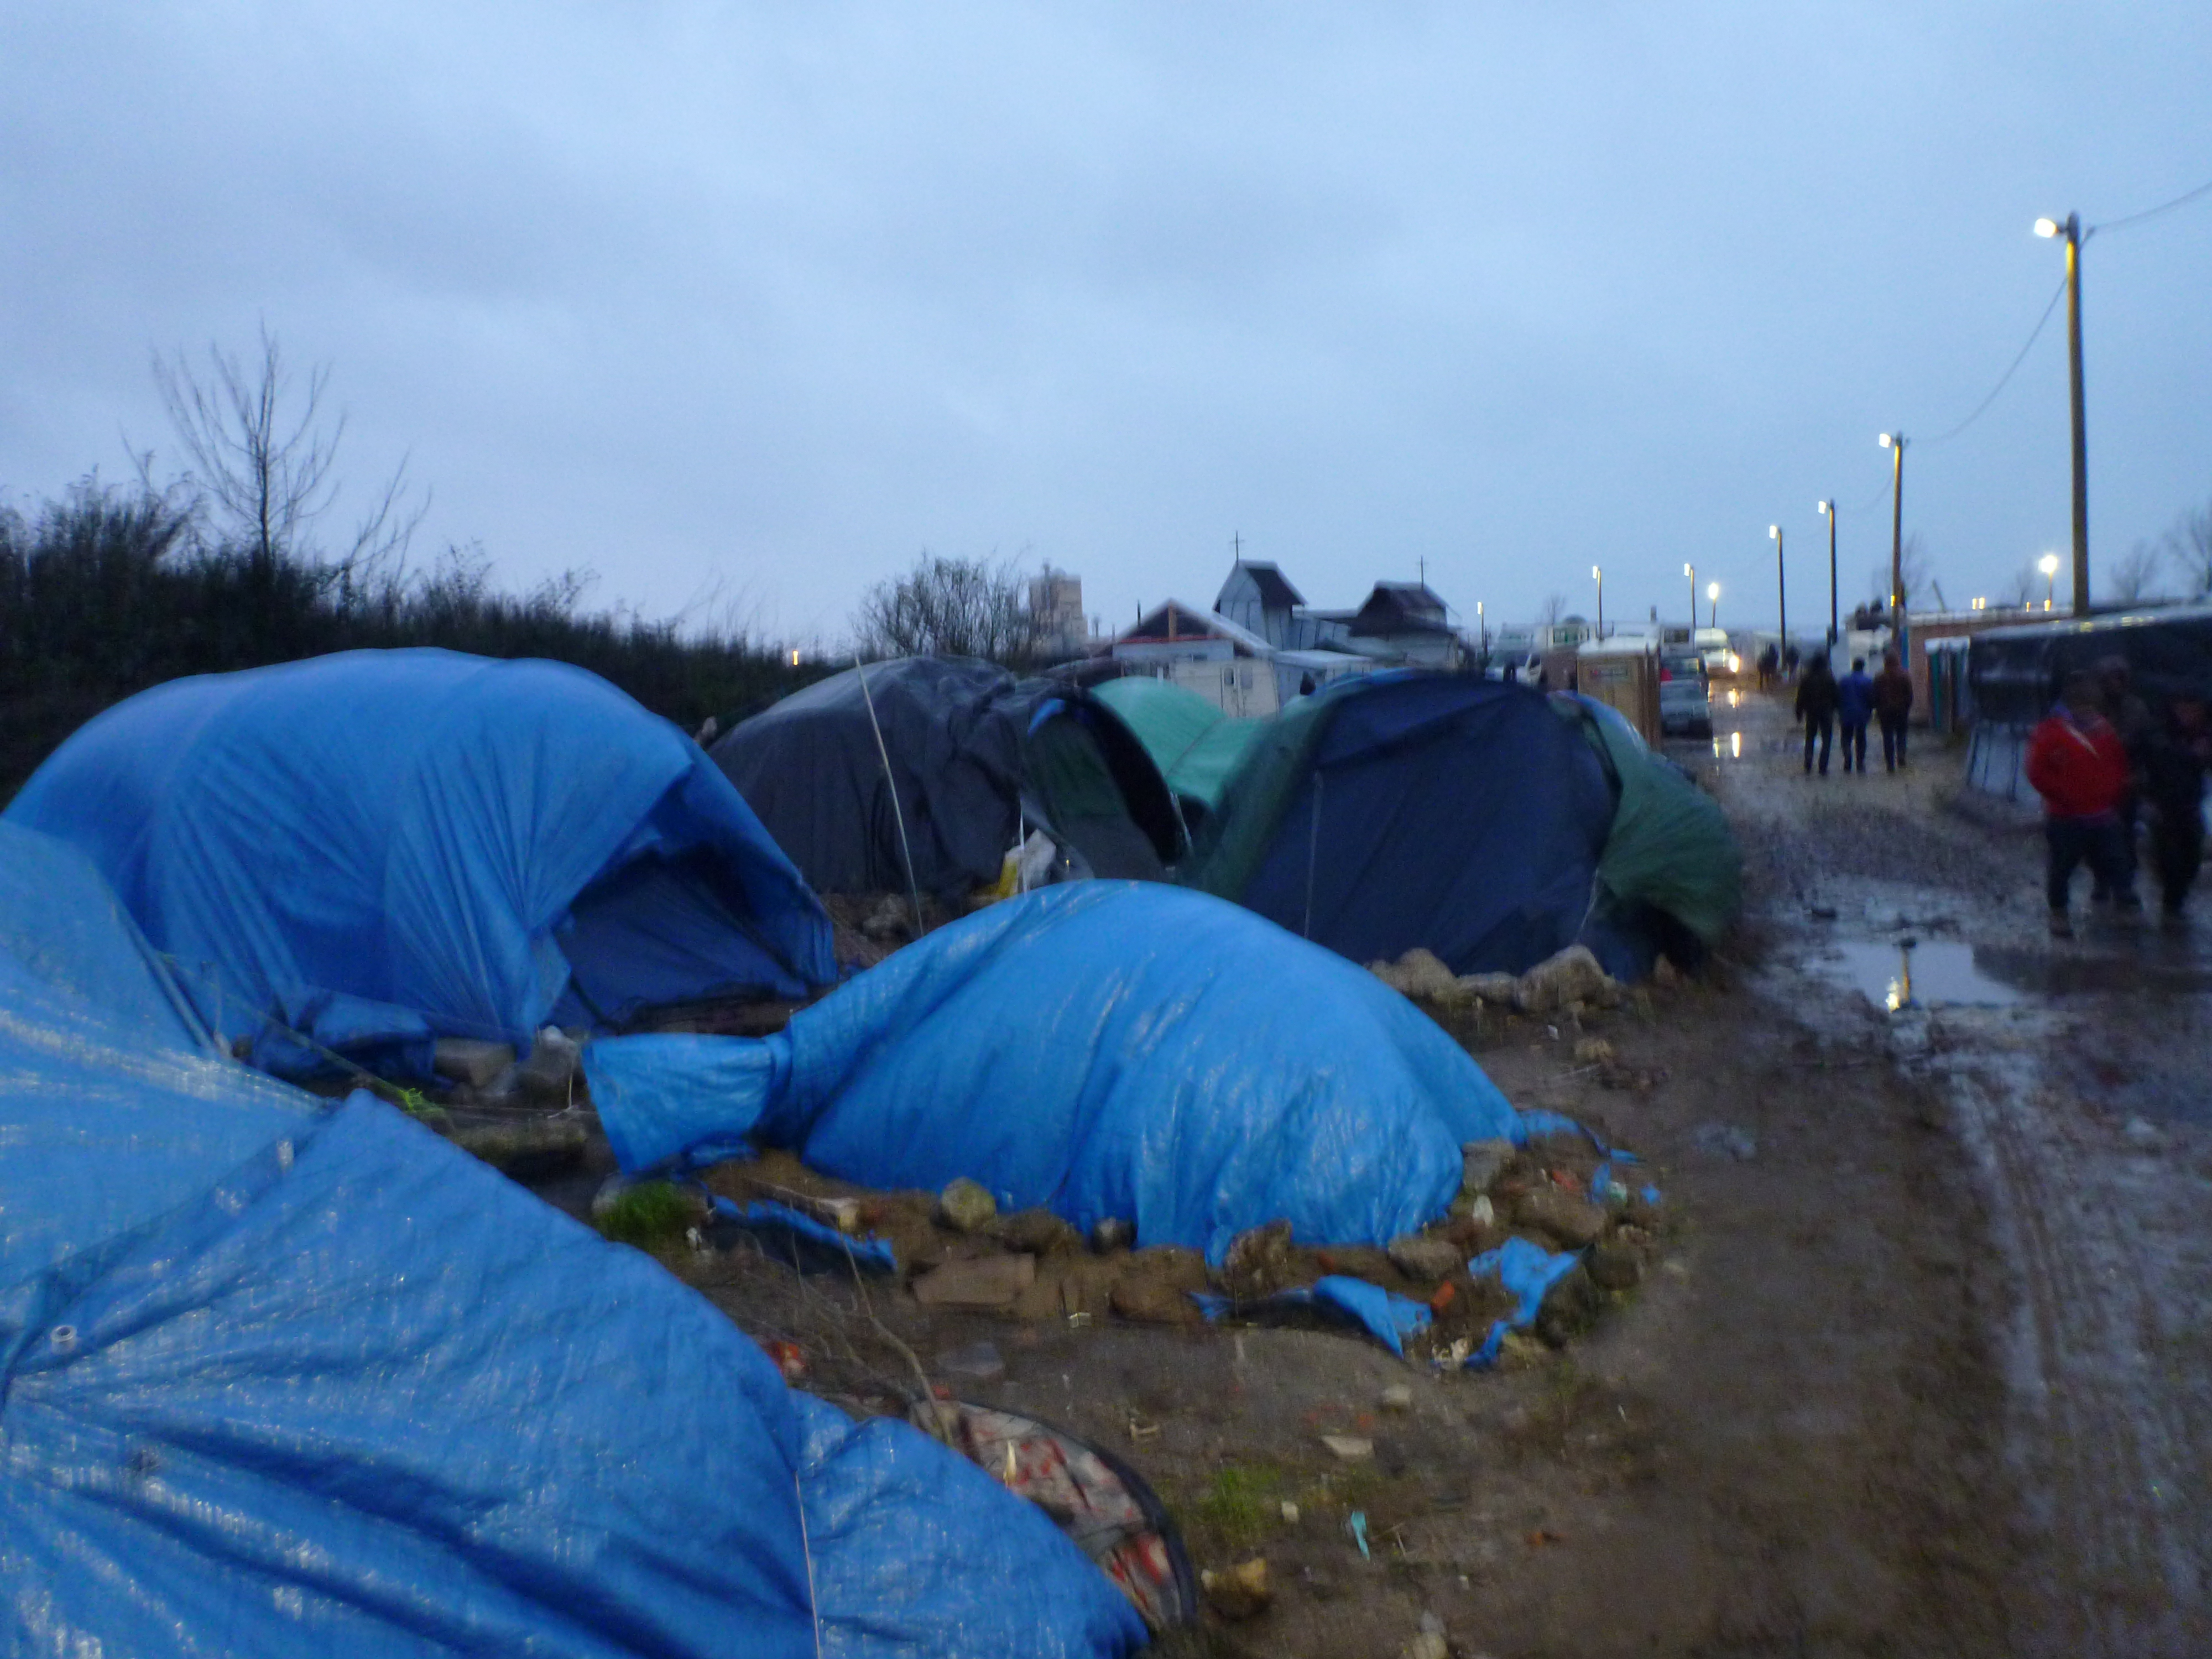 Tears turned to anger ... My sixth visit to the Calais Jungle